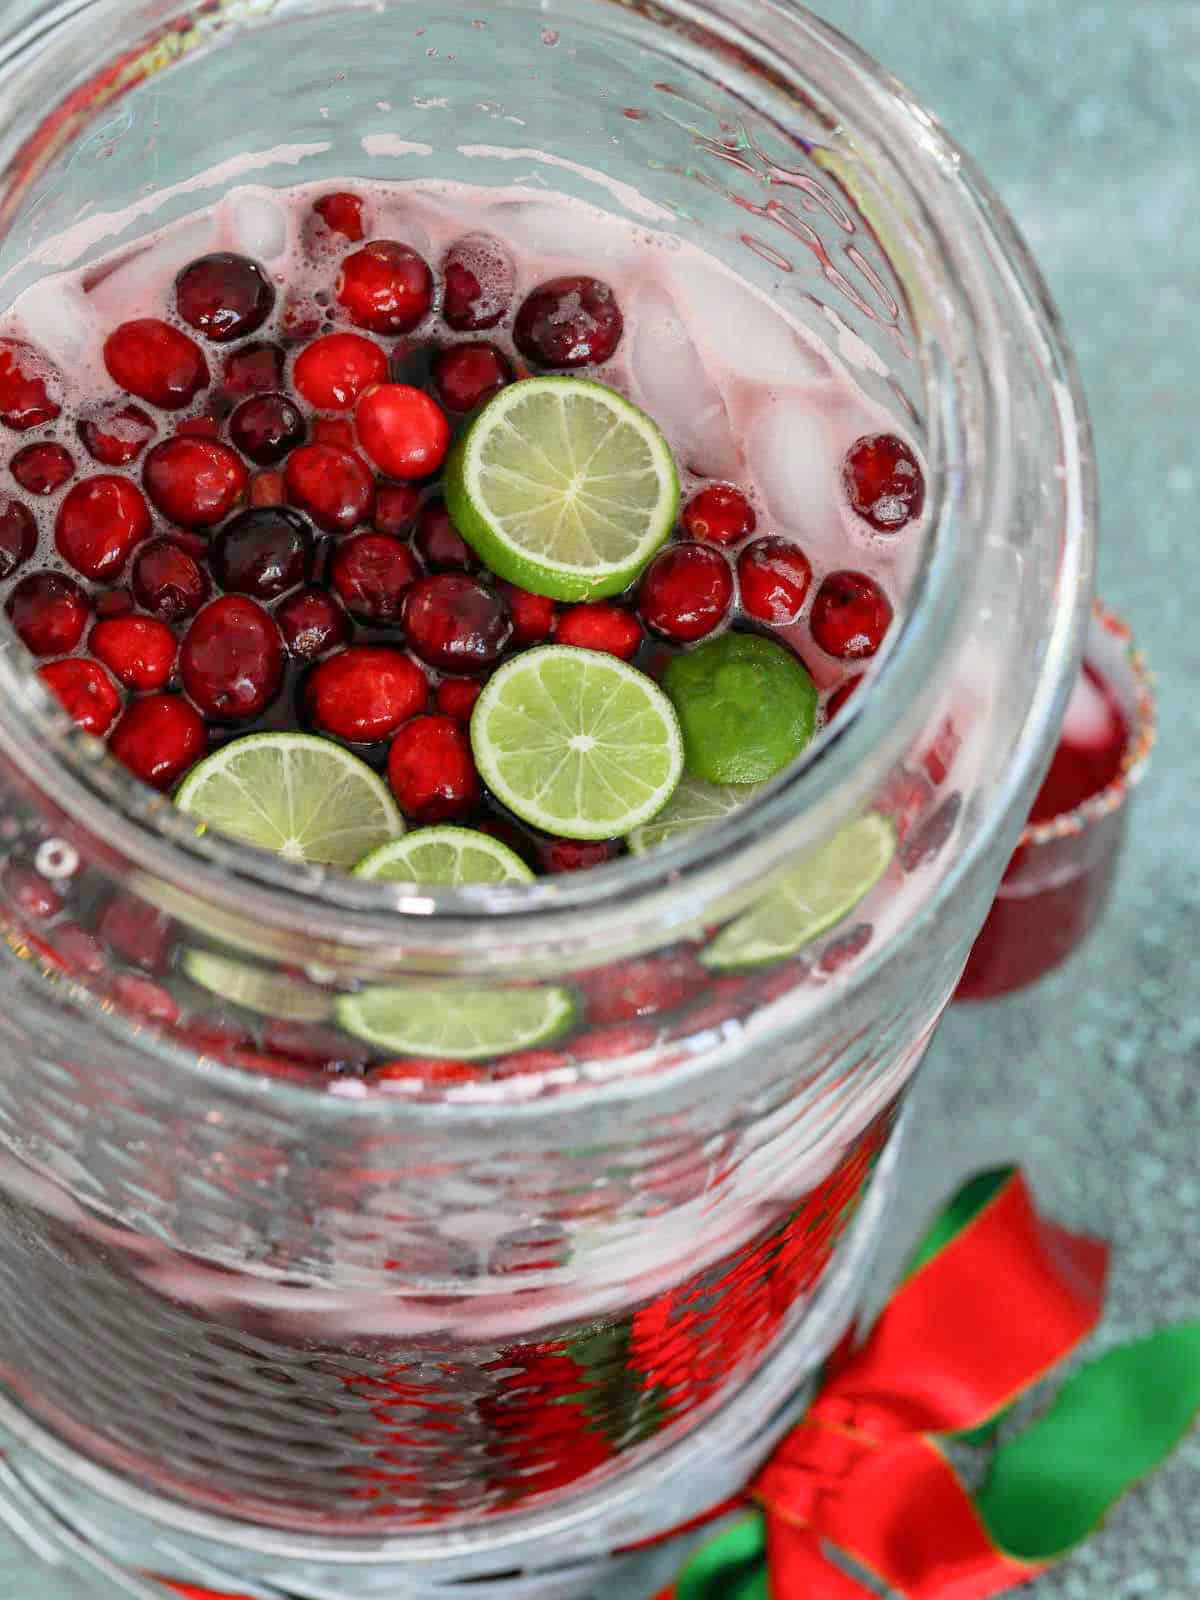 https://www.delicioustable.com/wp-content/uploads/2021/12/Christmas-Punch-bev-container.jpg